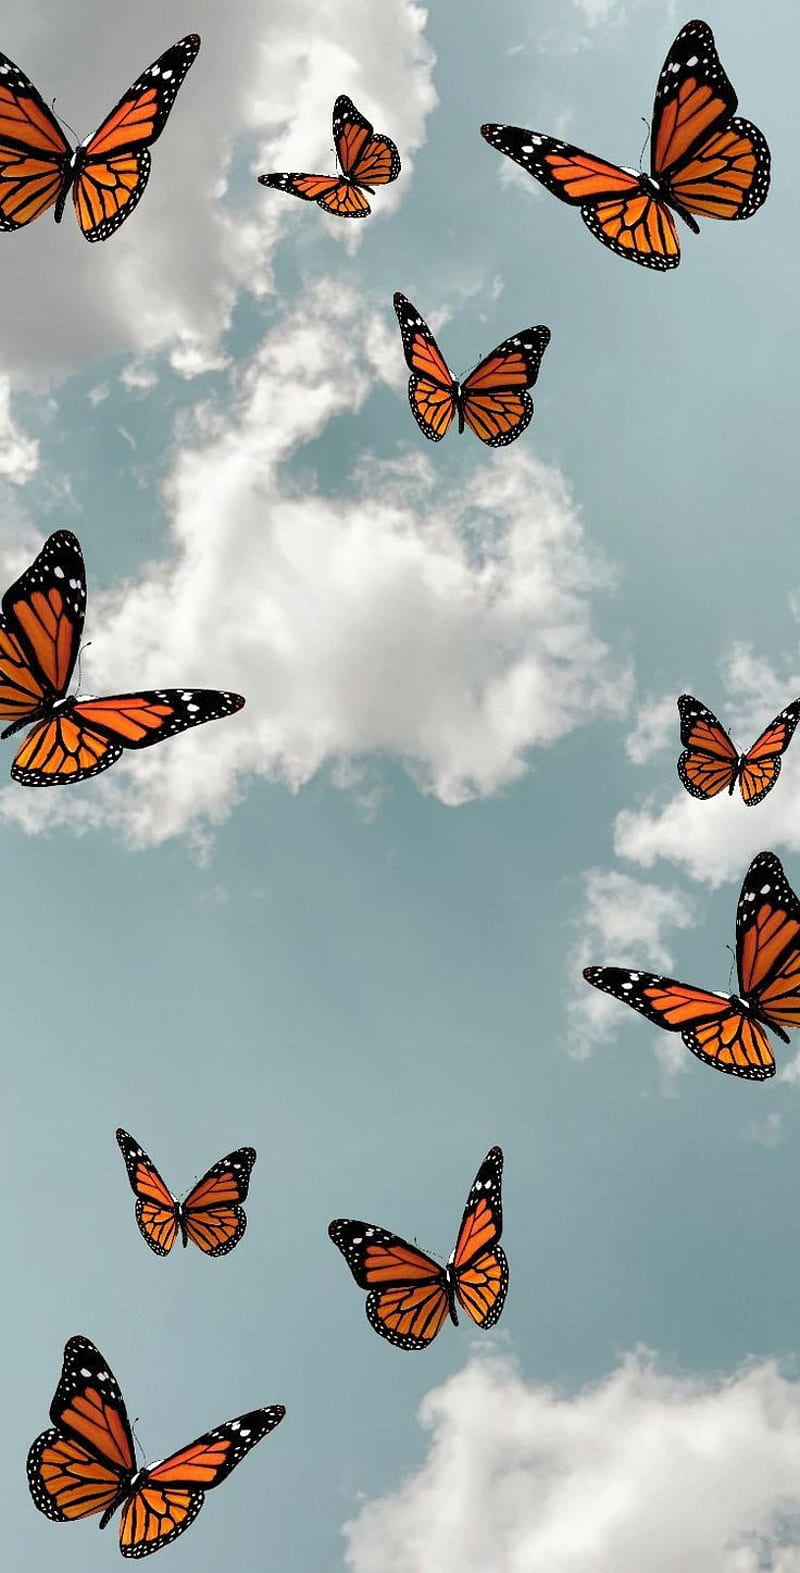 Butterfly wallpaper, blue sky in the background, with white clouds, aesthetic background - Butterfly